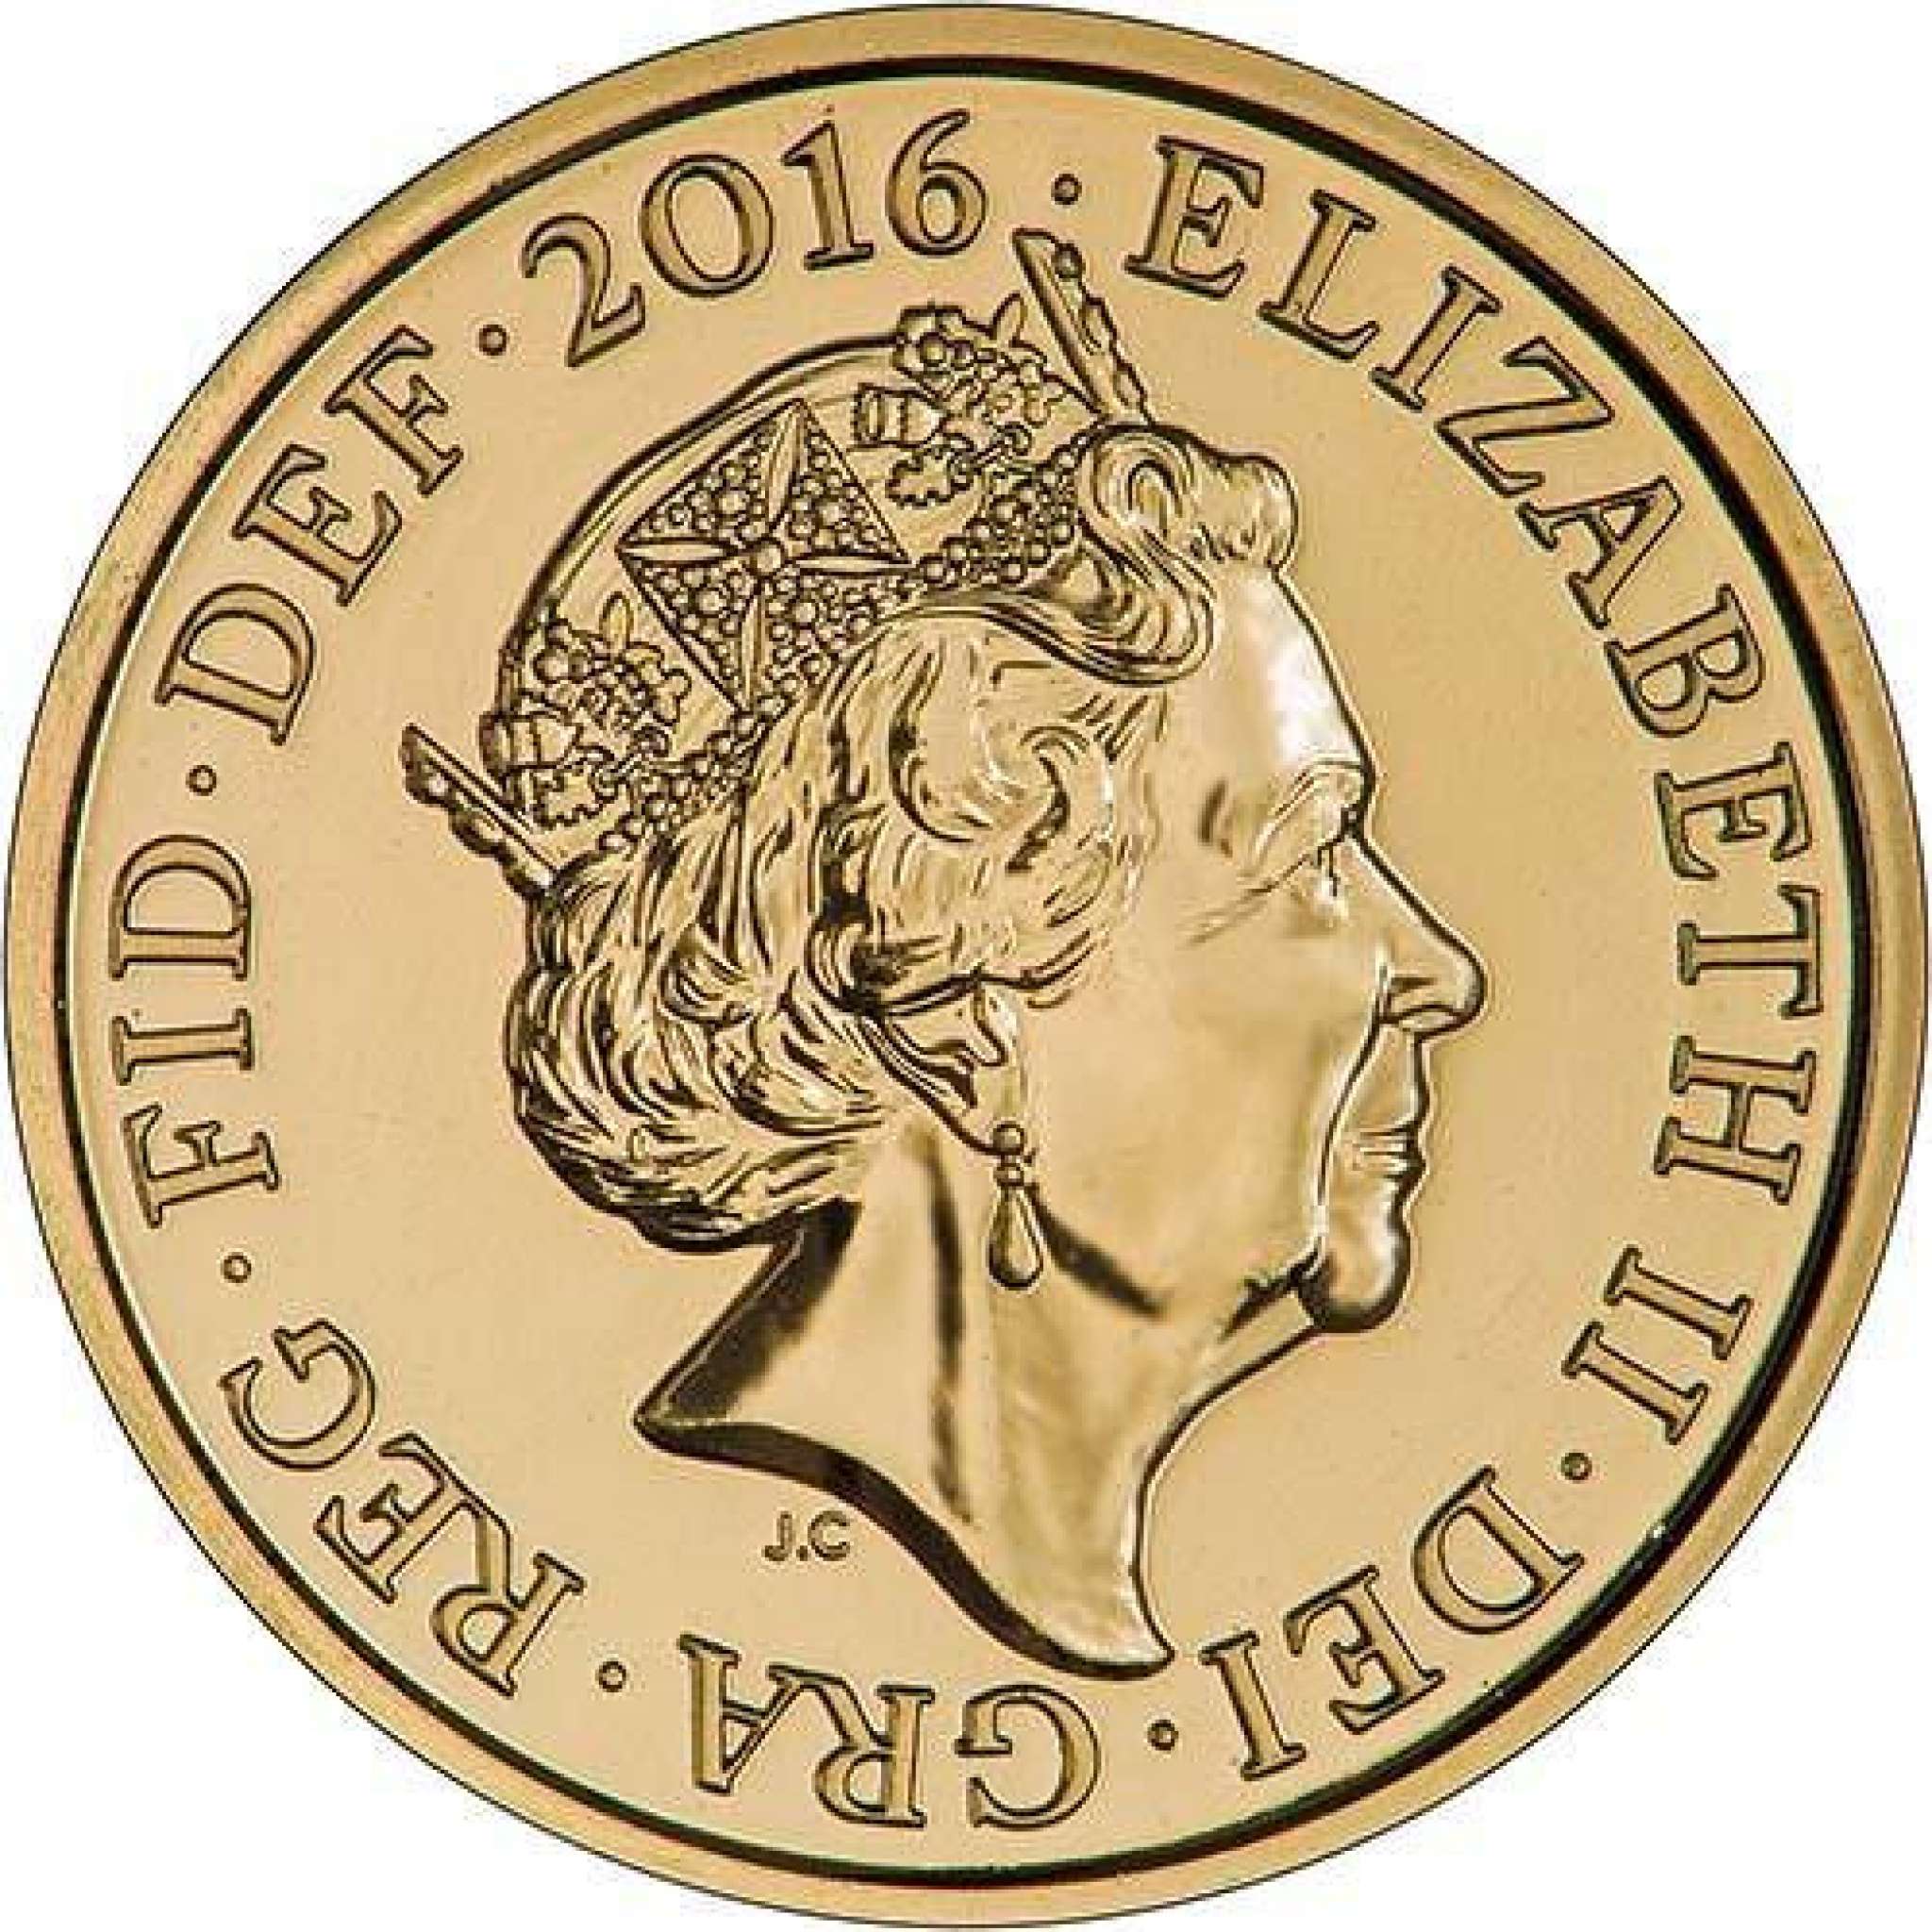 2016 base metal bu farewell and nations of the crown 1 coin sets united kingdom the royal mint 2 coins 6.